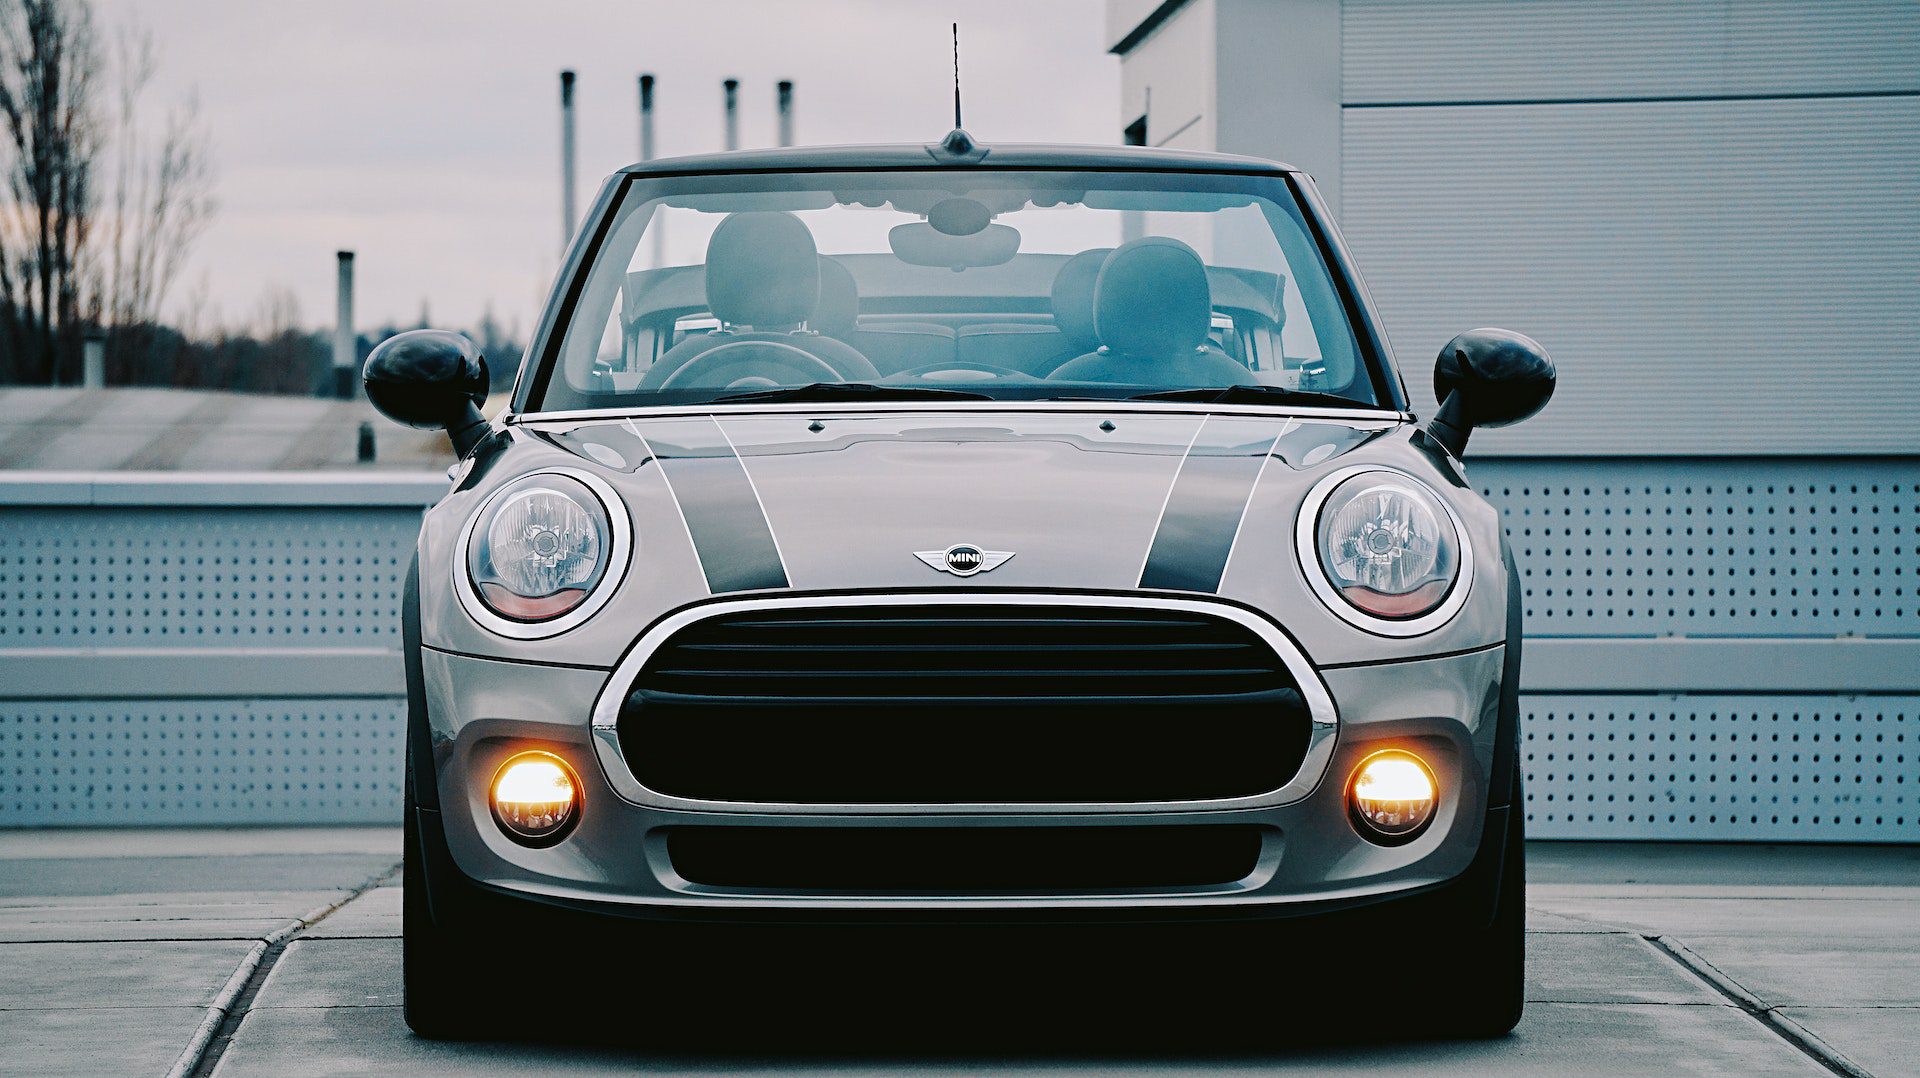 mini-cooper-car-repair-services-and-tire-replacement-hollywood-fl